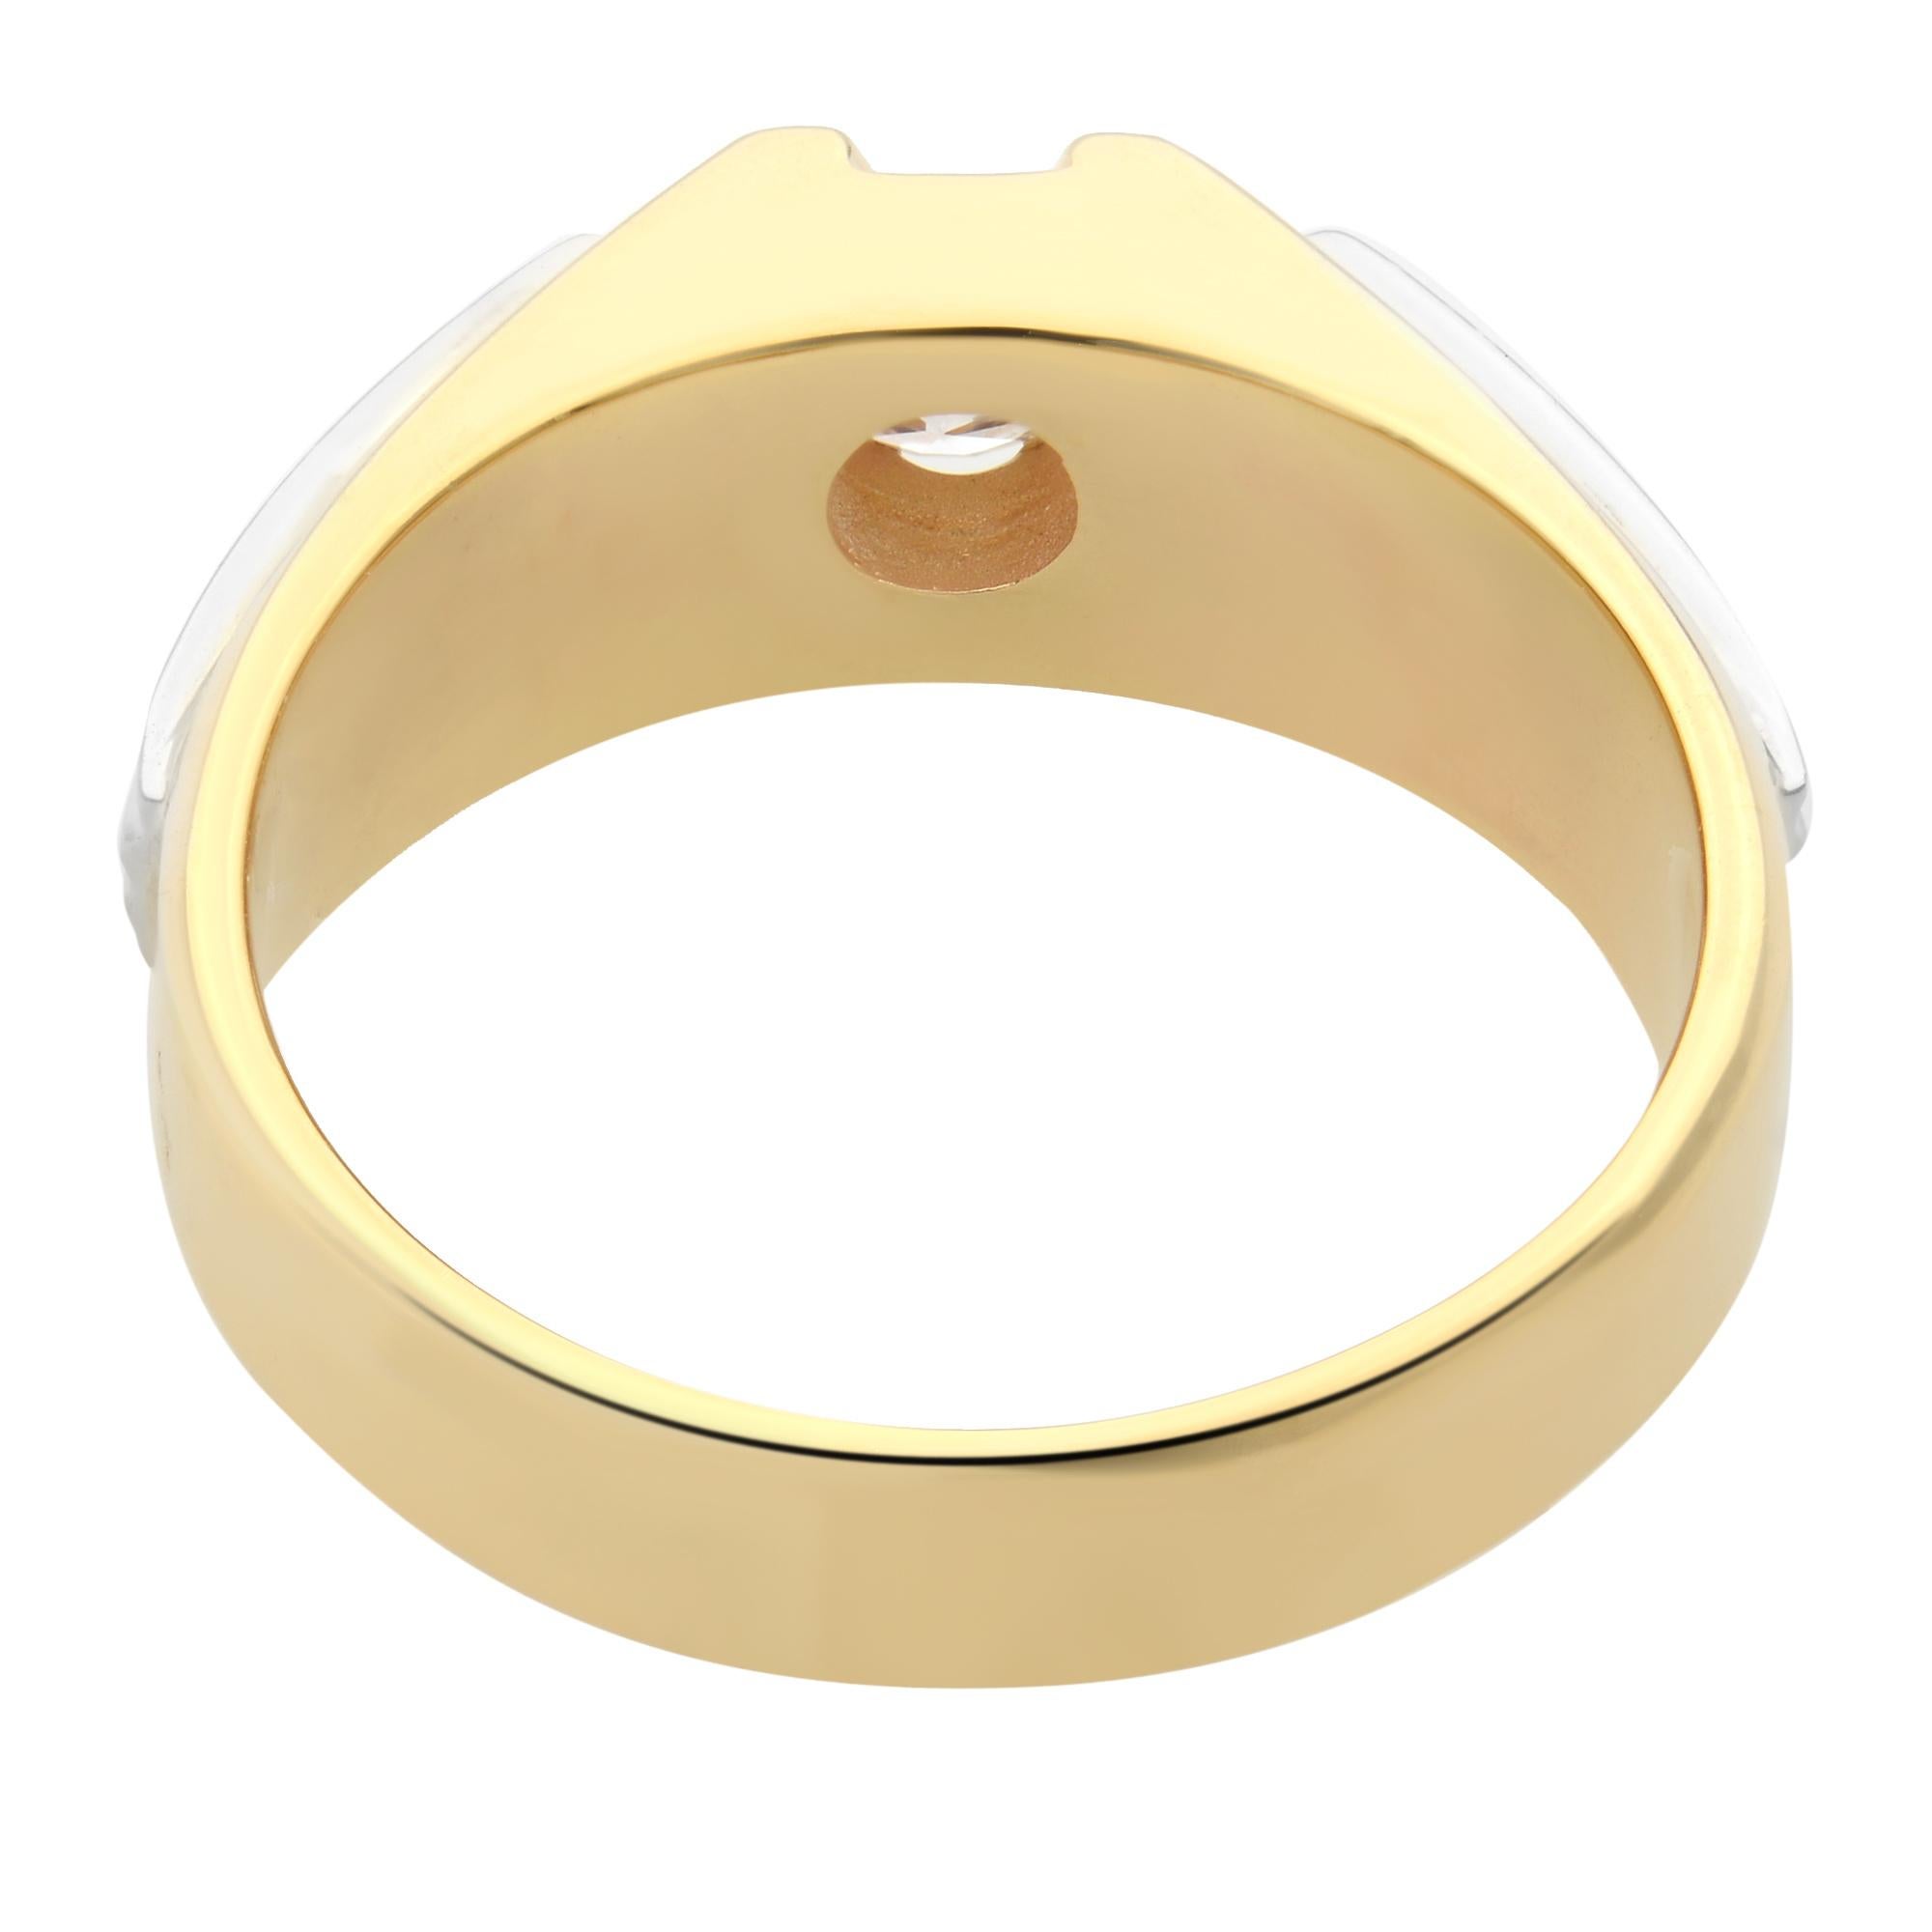 Rachel Koen 0.50Cttw Round Cut Diamond Men's Band Ring 14K Yellow Gold Size 10.5 In Excellent Condition For Sale In New York, NY